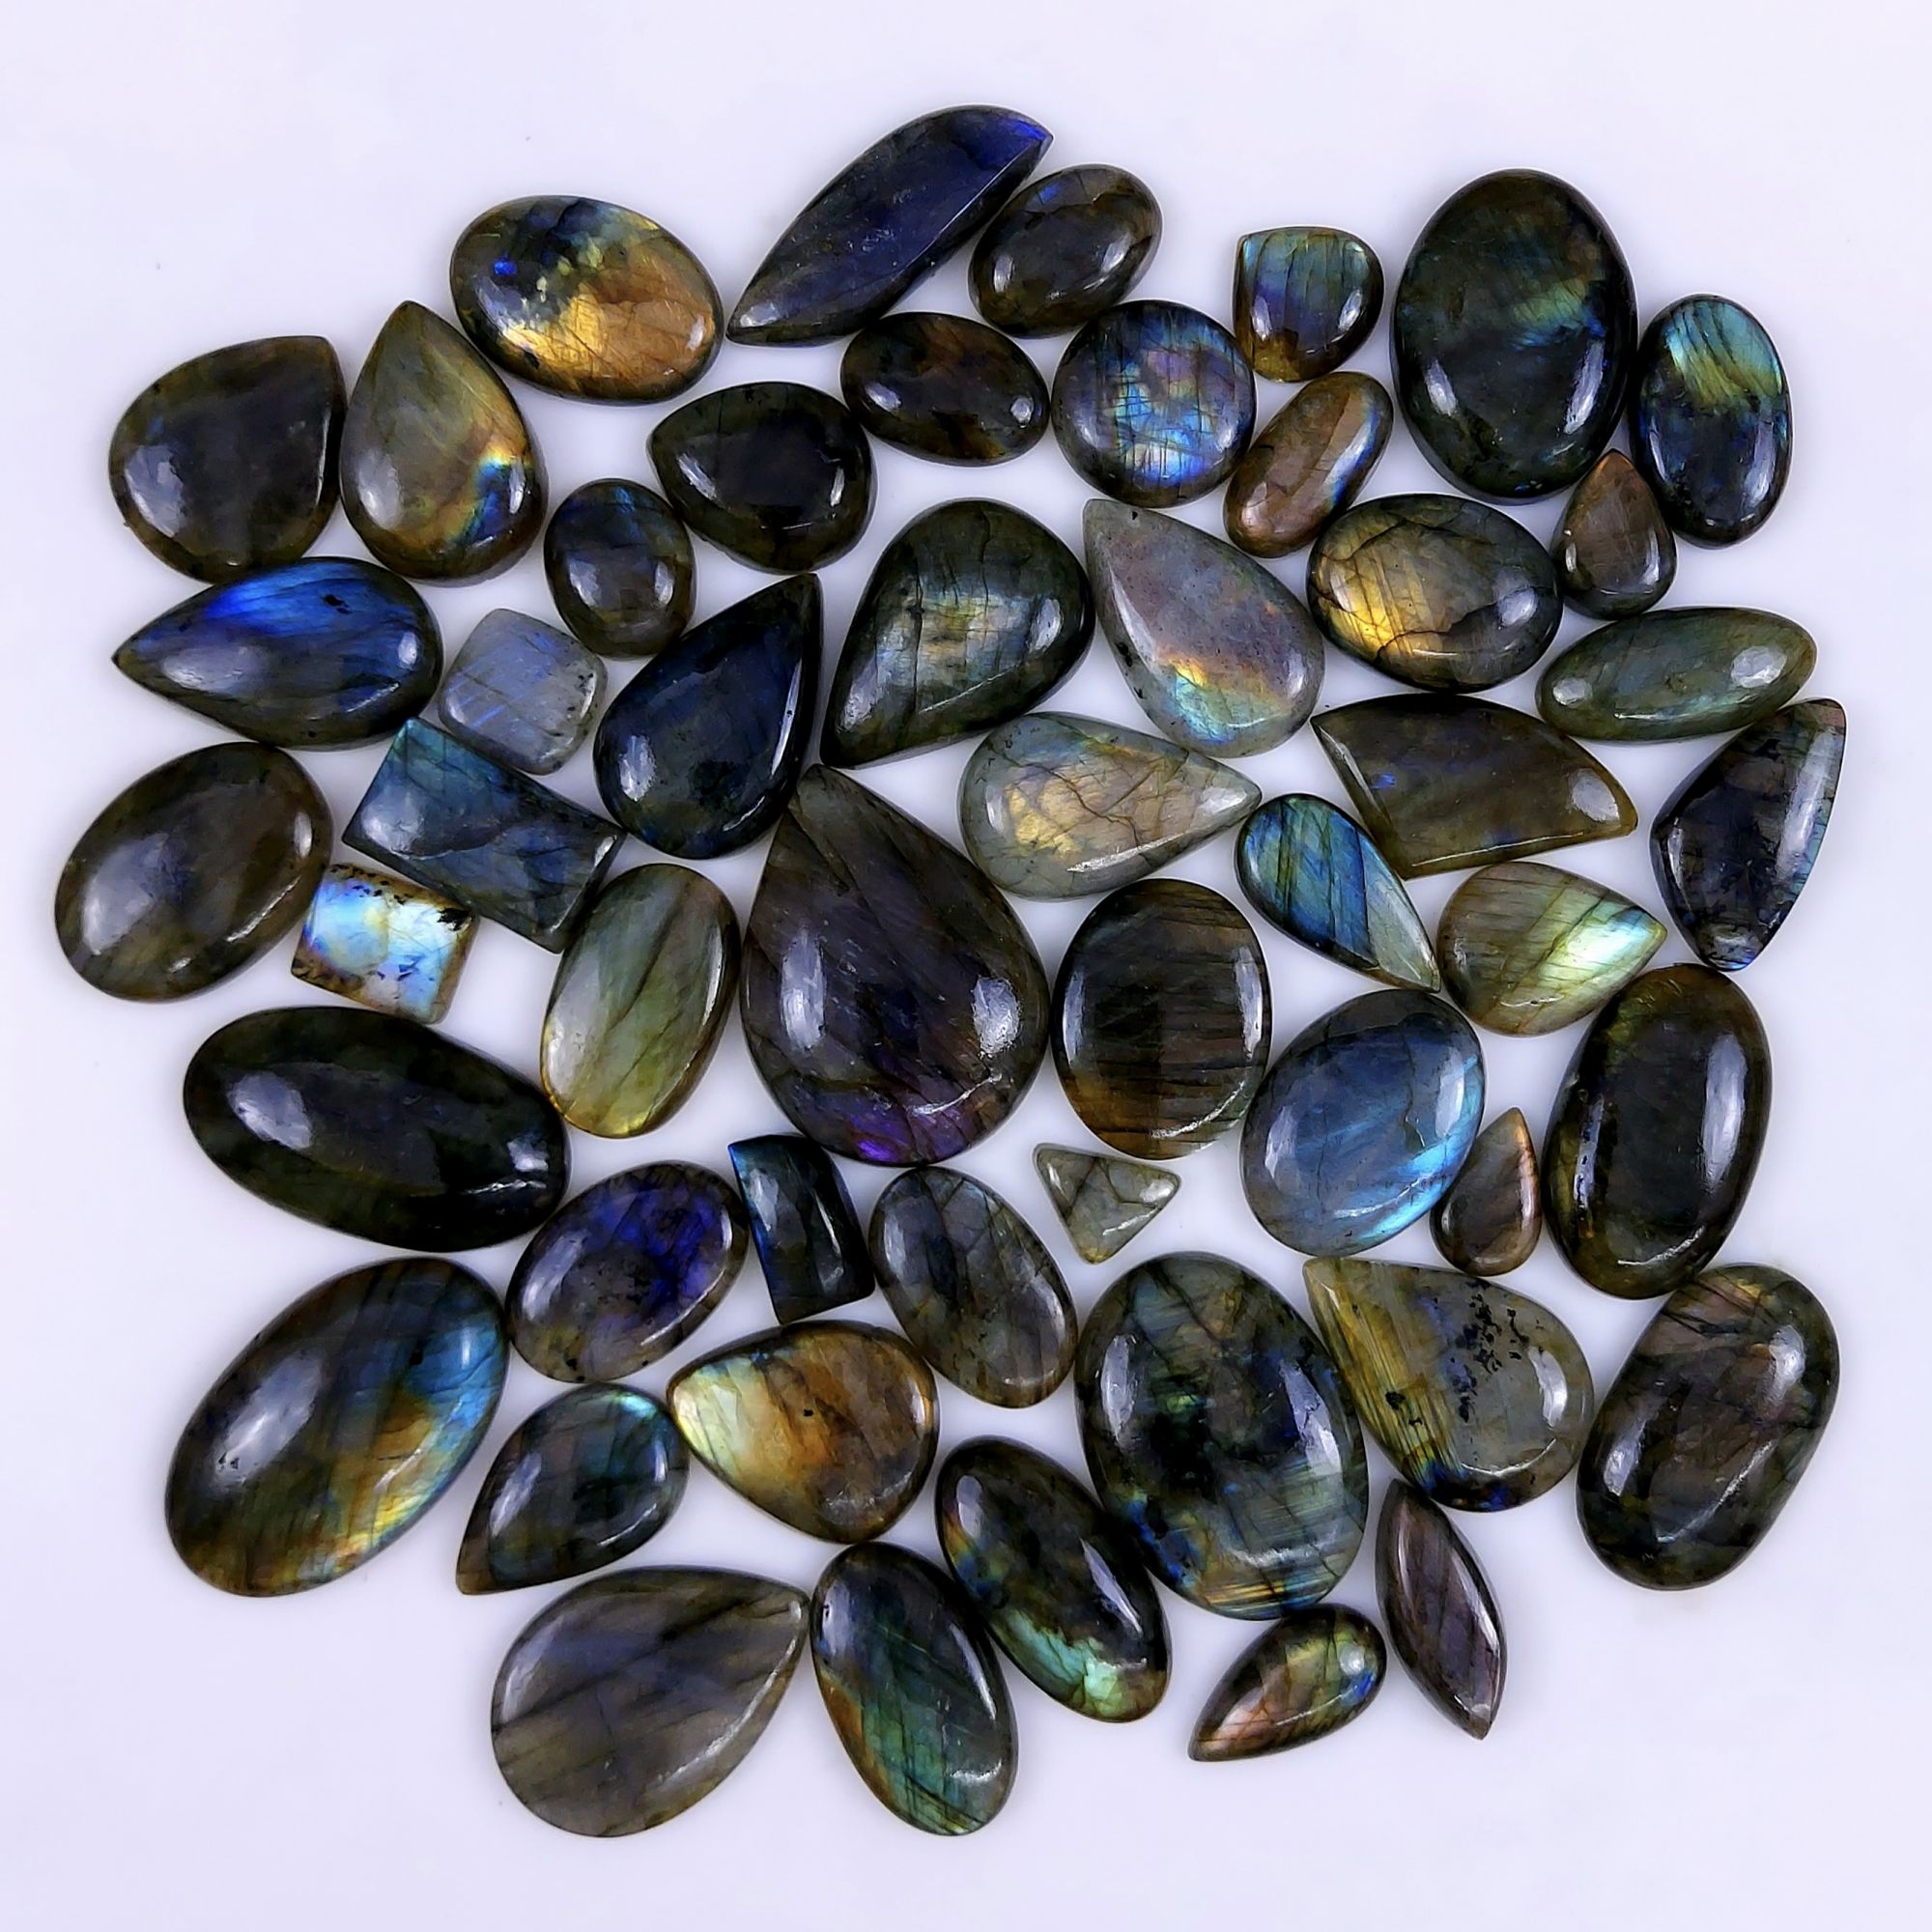 51pc 1631Cts Labradorite Cabochon Multifire Healing Crystal For Jewelry Supplies, Labradorite Necklace Handmade Wire Wrapped Gemstone Pendant 45x32 14x14mm#6281